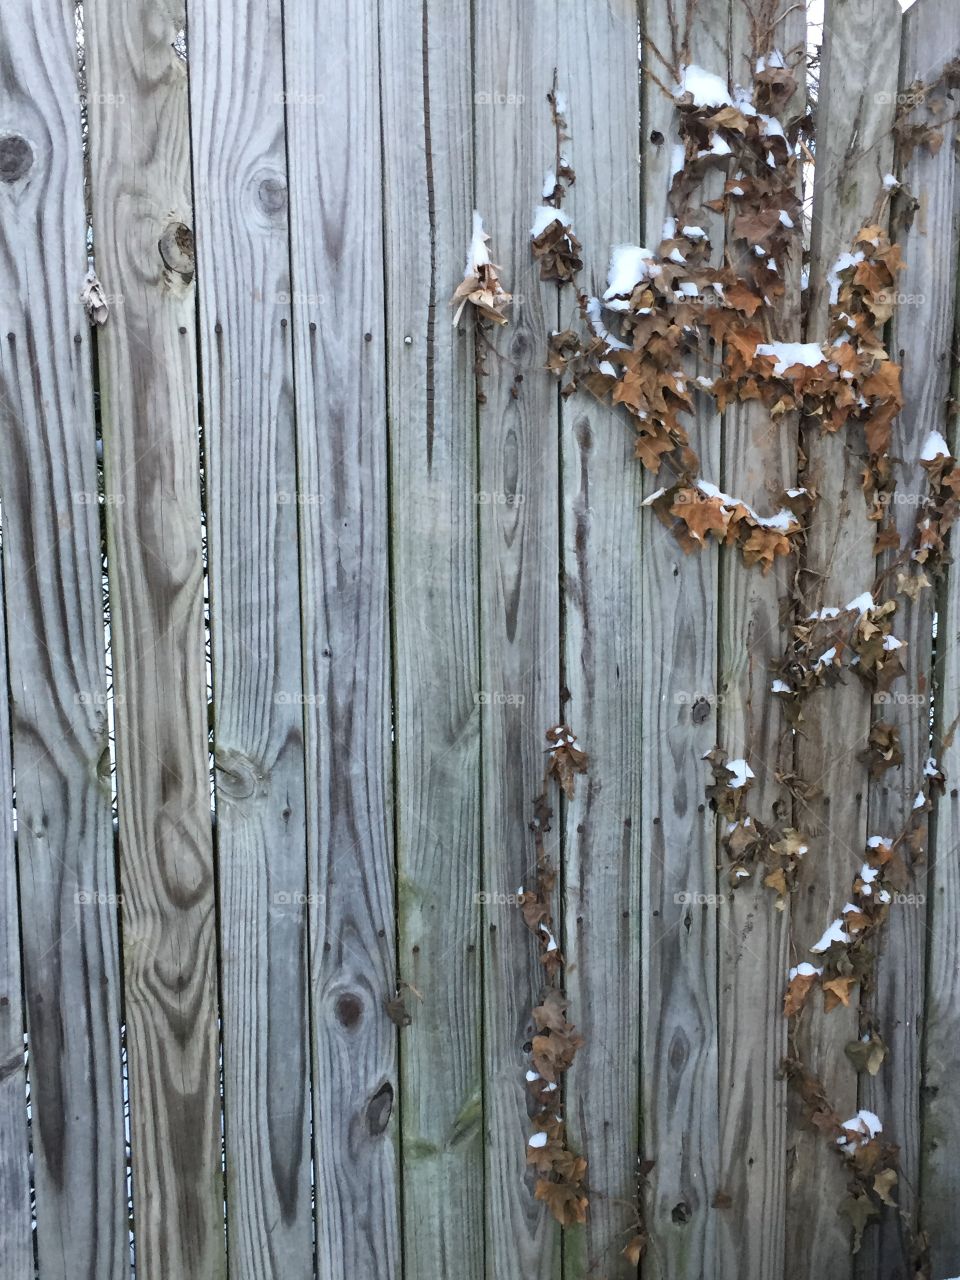 Snow on ivy crawling up a fence